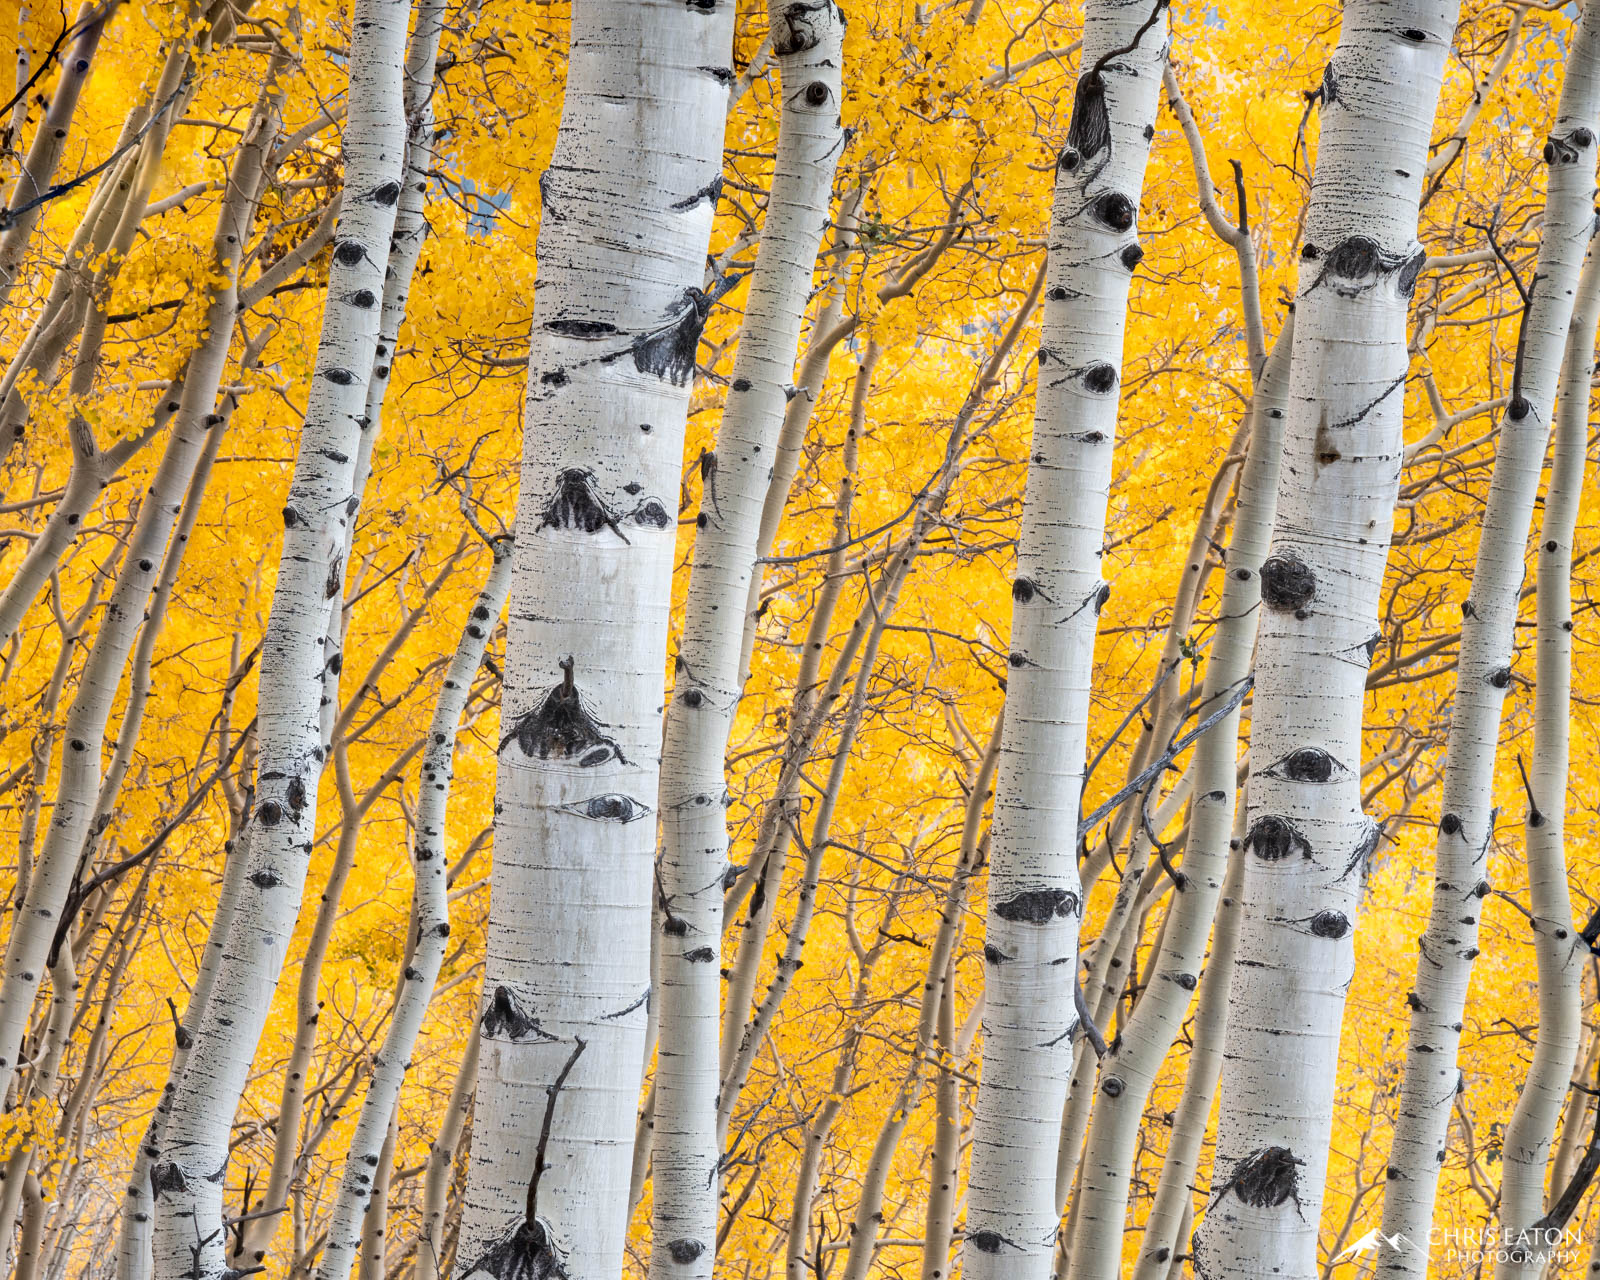 Soft early morning light brings out the color in the leaves and the paper bark of Quaking Aspens (Populus tremuloides). An aspen...